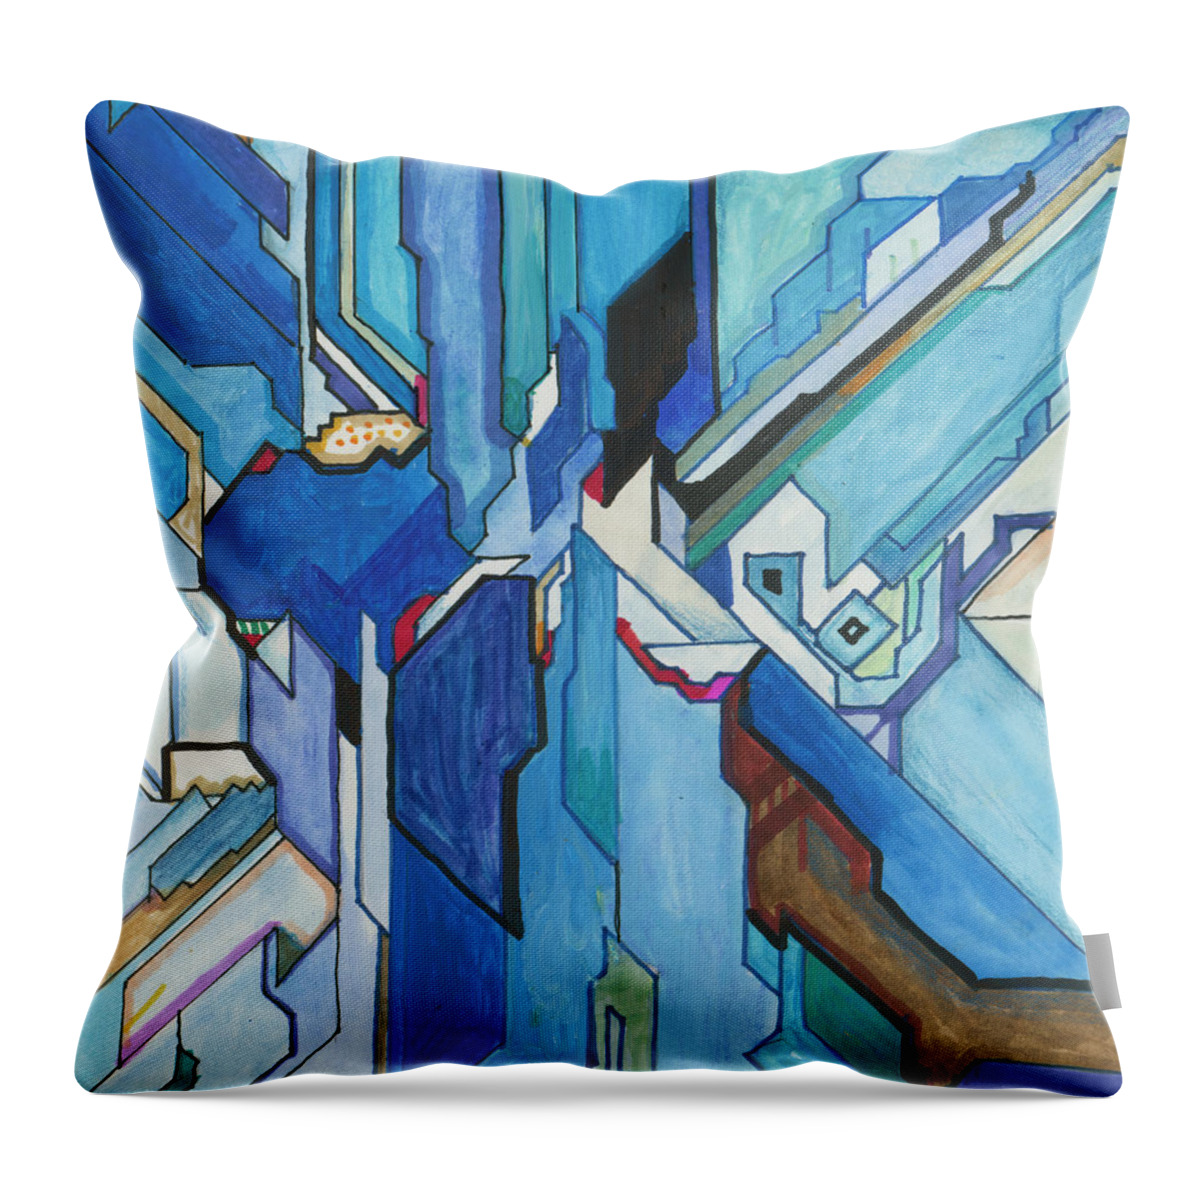 Bible Throw Pillow featuring the painting Genesis - THE WIEDMANN BIBLE page 13 by Willy Wiedmann